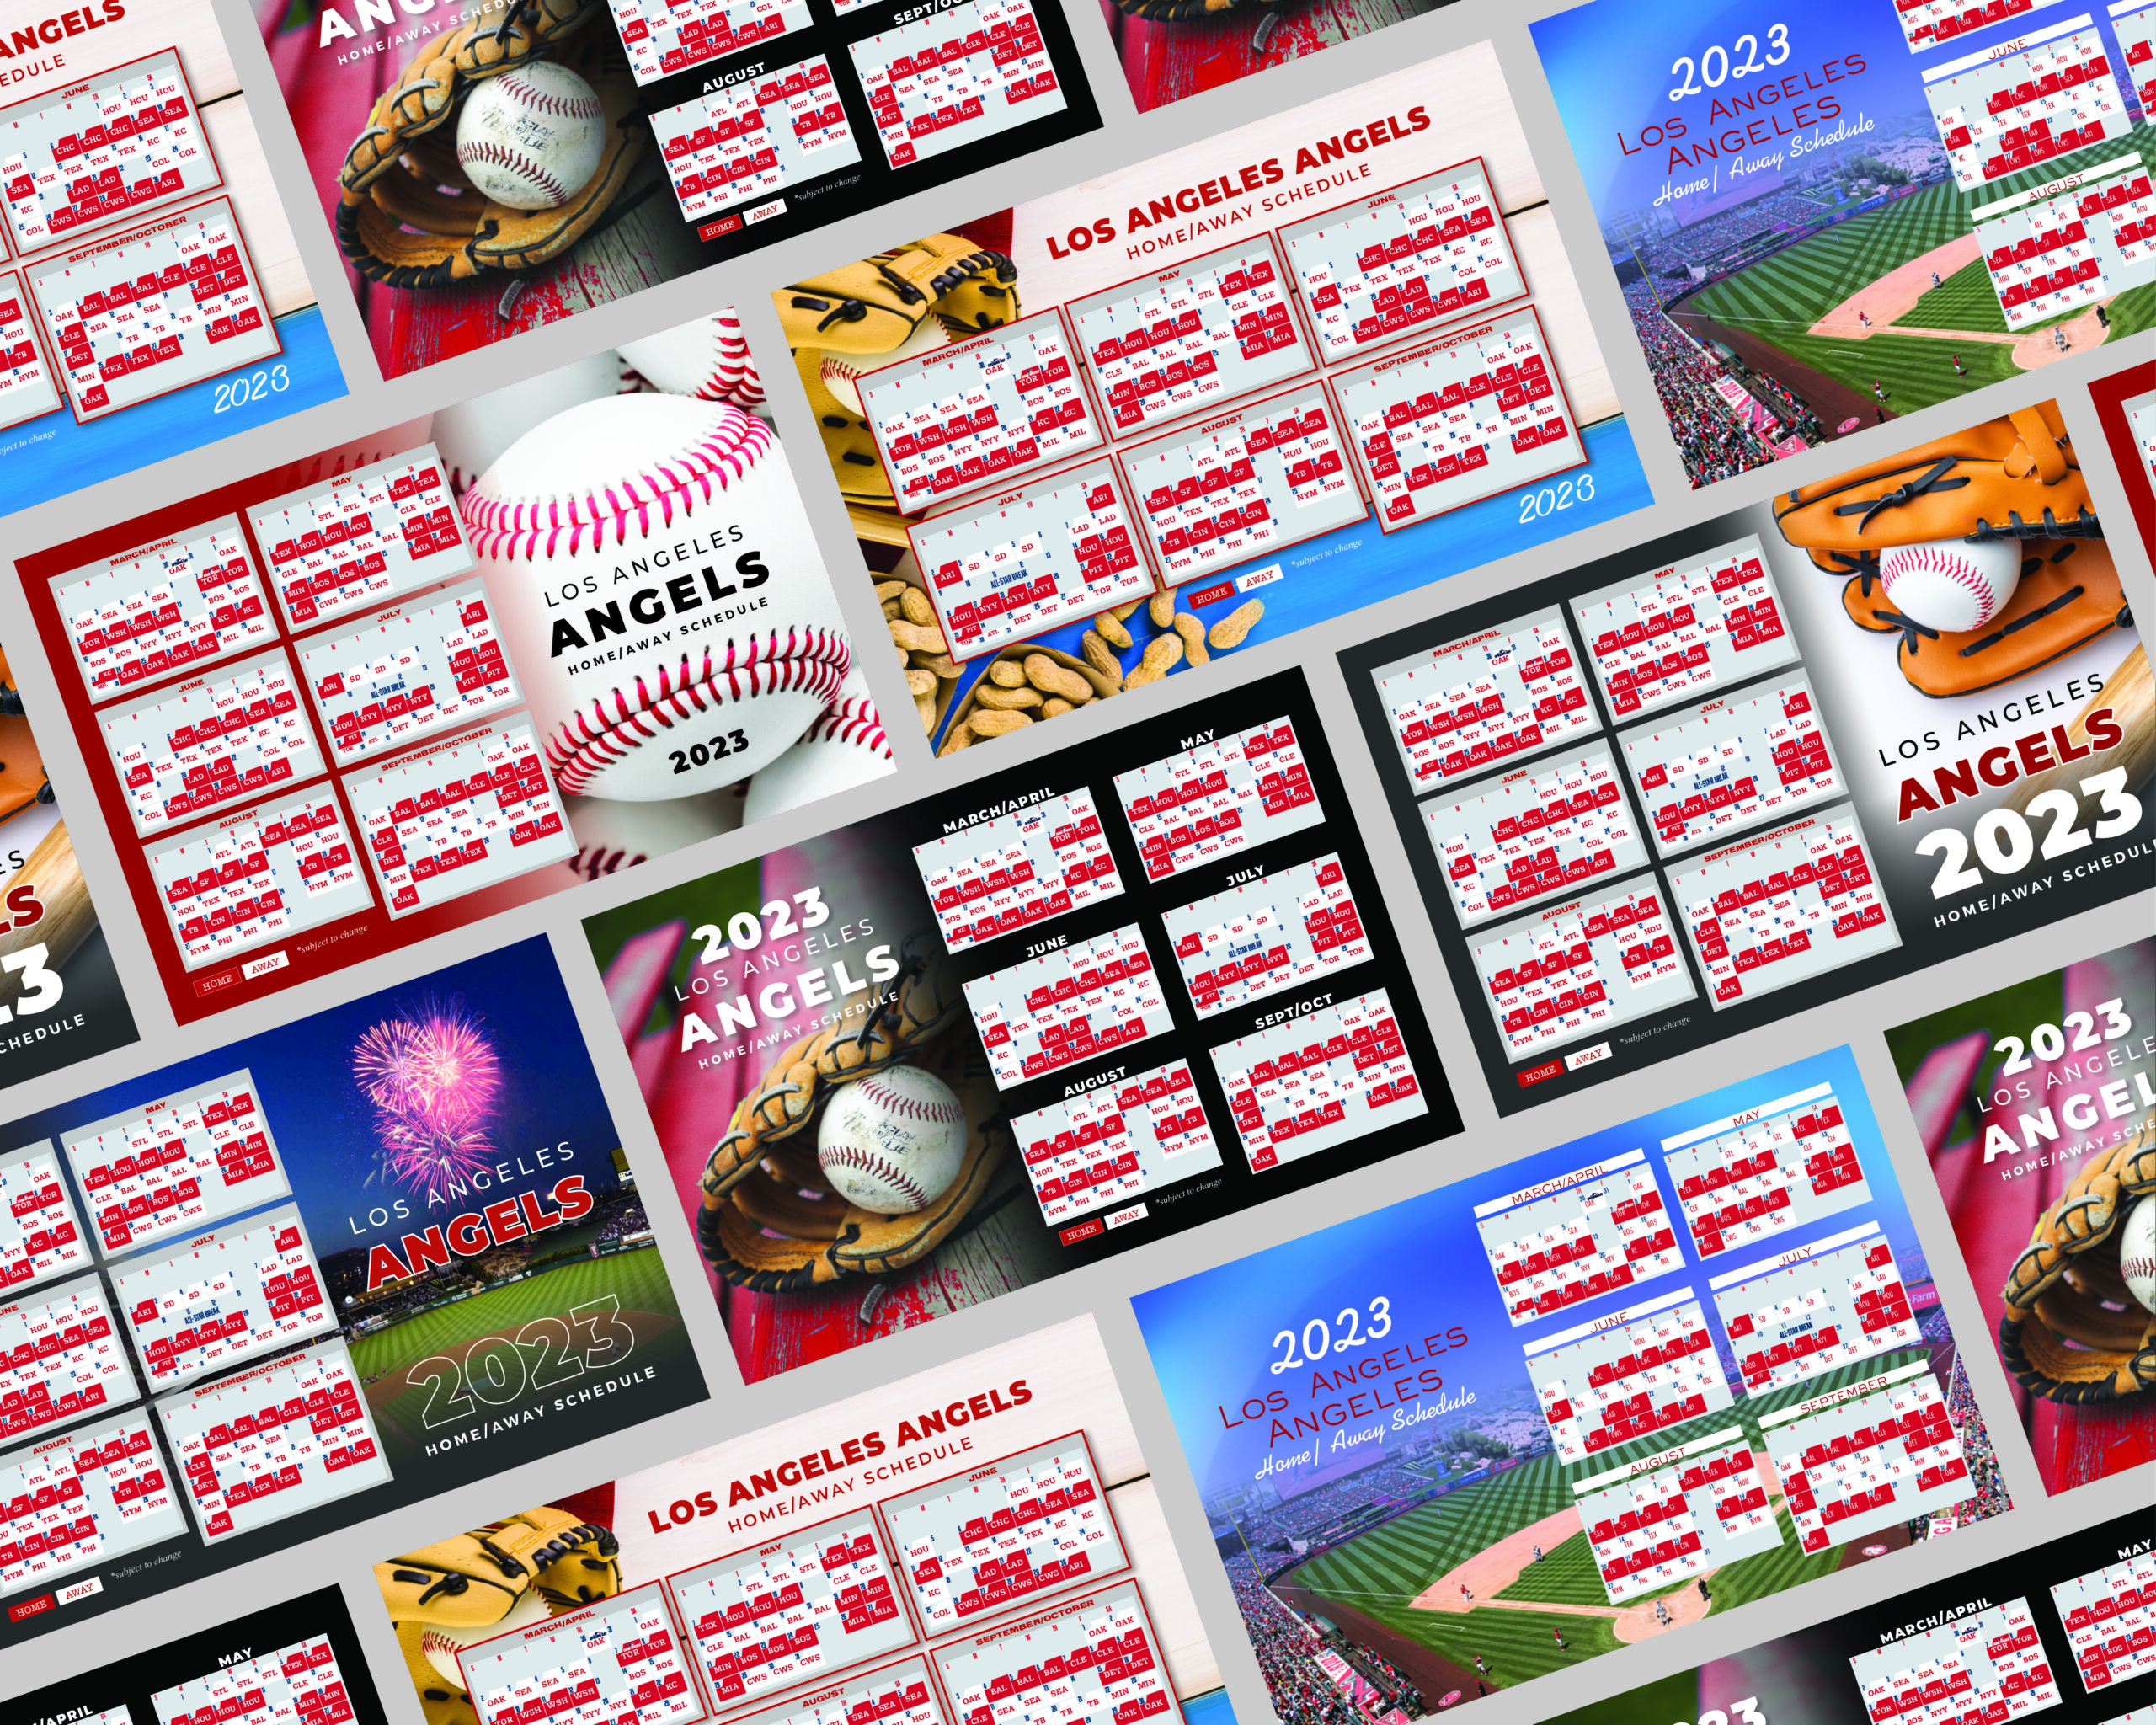 Examples of Angels Baseball Schedule Postcards